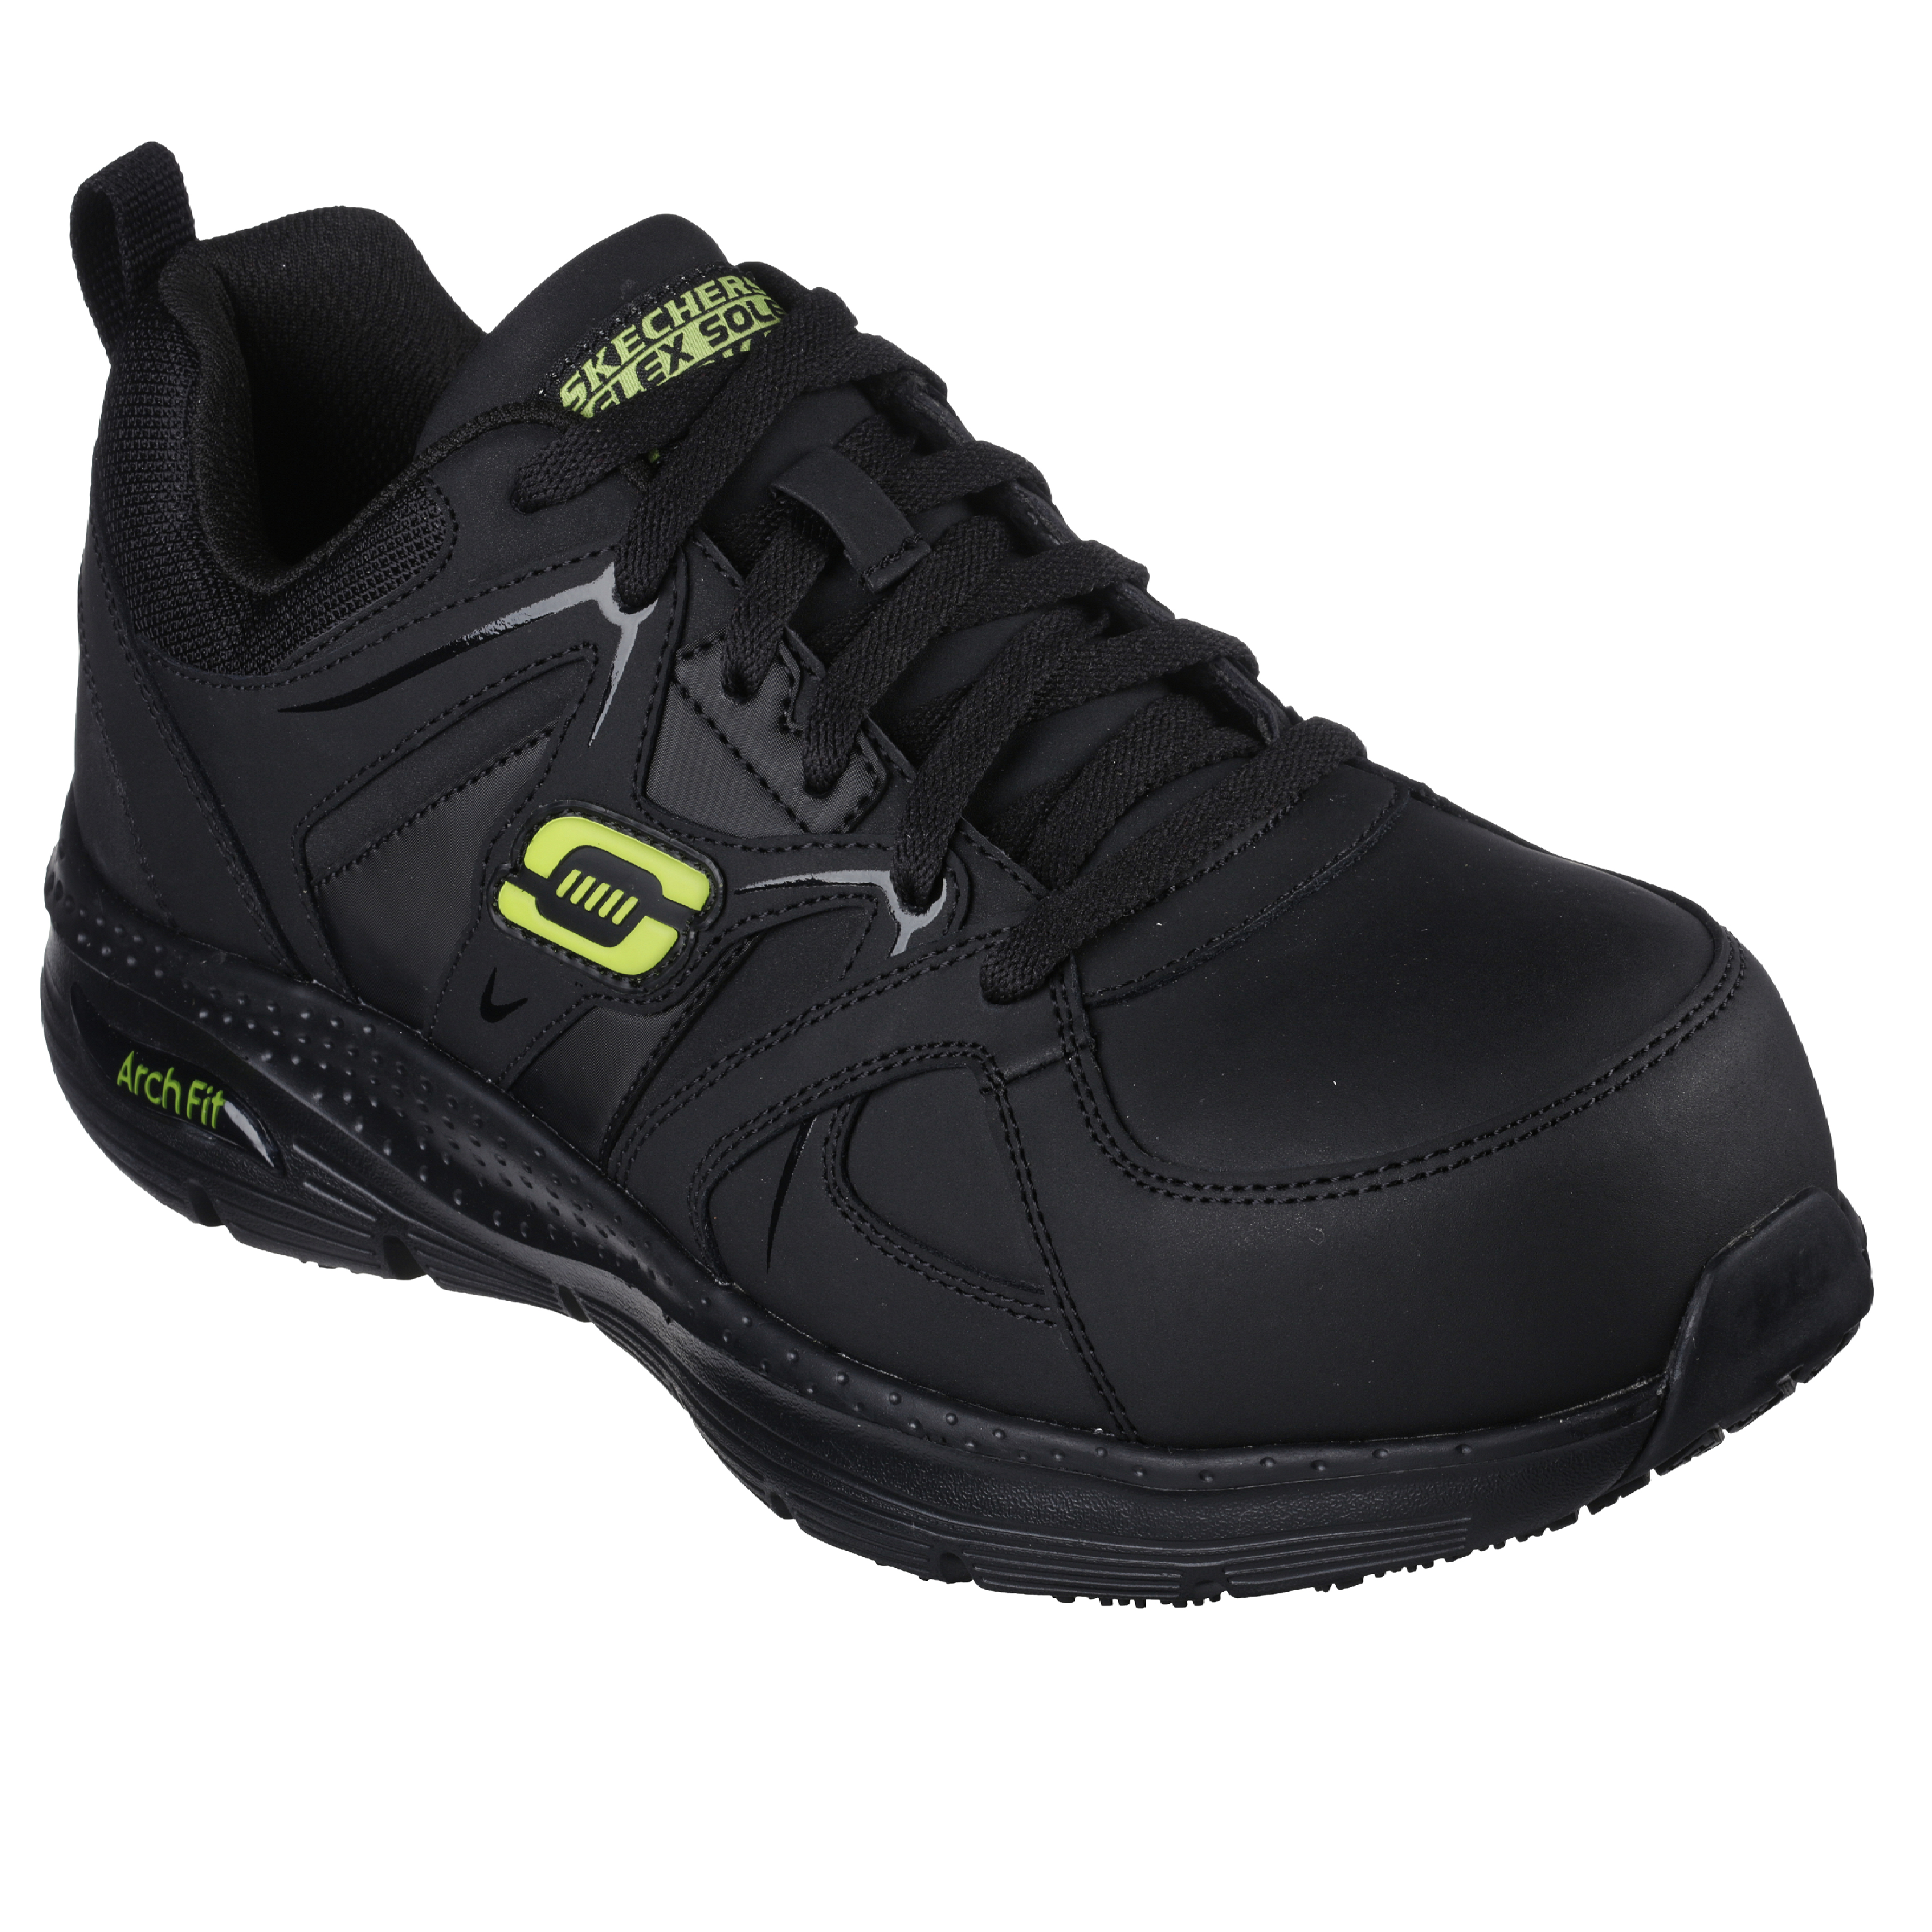 Skechers Work 200158 ARCH-FIT SELLIAN ALLOY TOE Safety Shoes